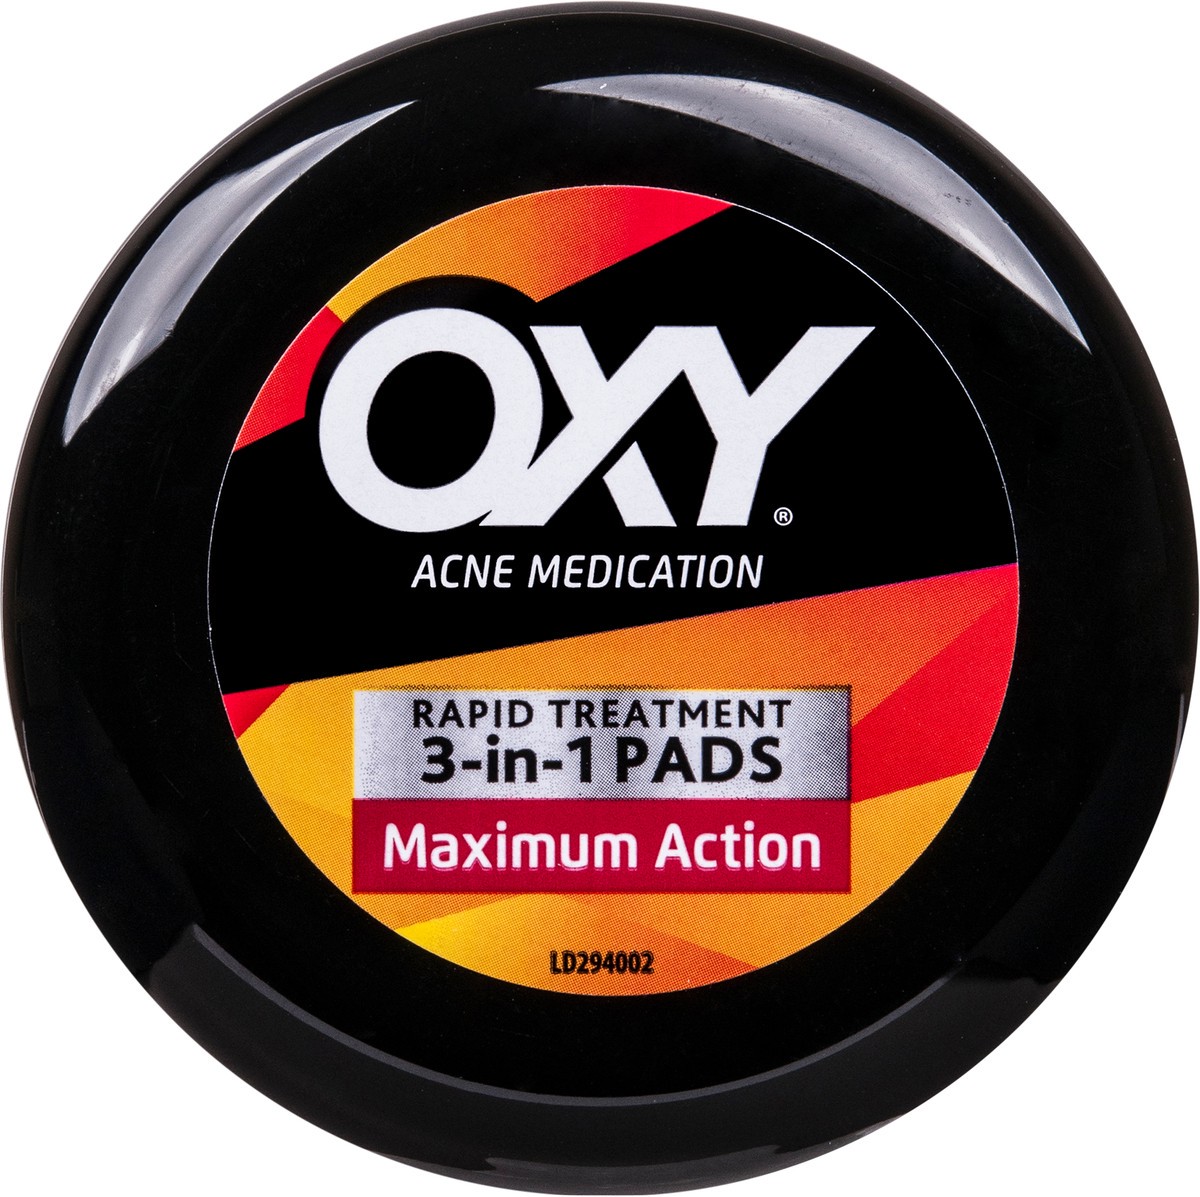 slide 6 of 6, Oxy Acne Medication Rapid Treatment Maximum Action 3-in-1 Pads, 90 ct